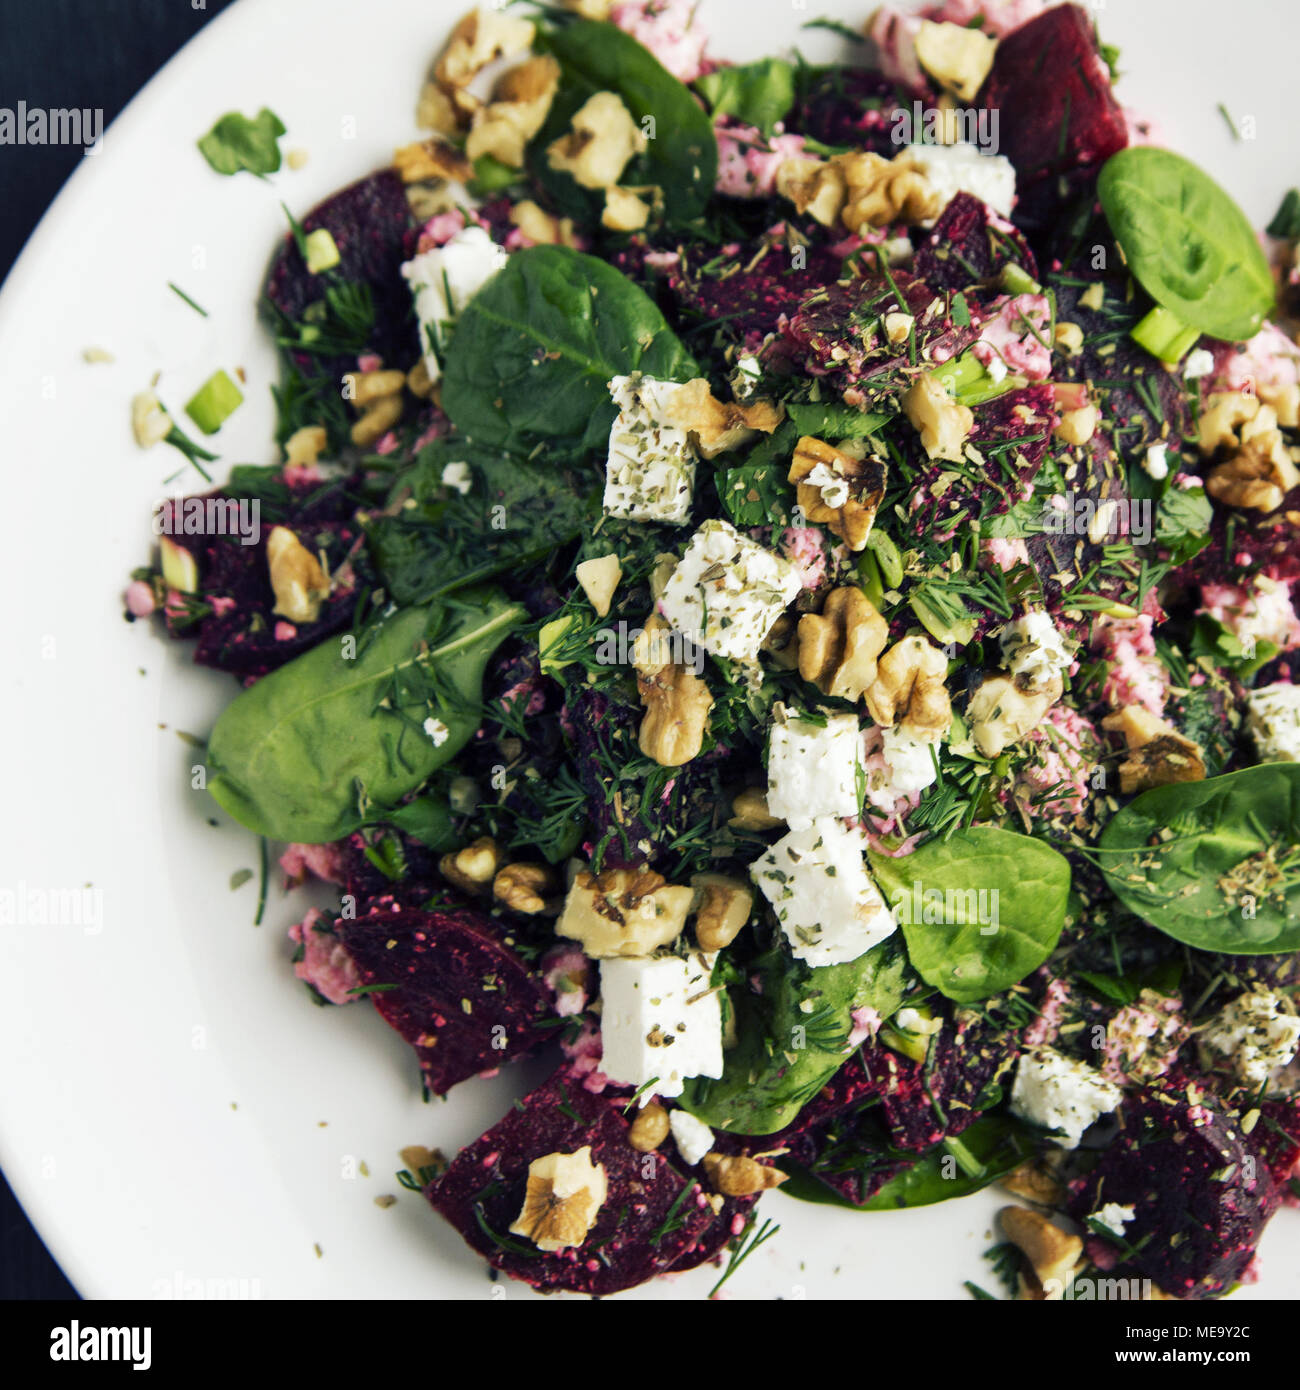 Beetroot Salad With Cottage Cheese Baby Spinach And Walnuts